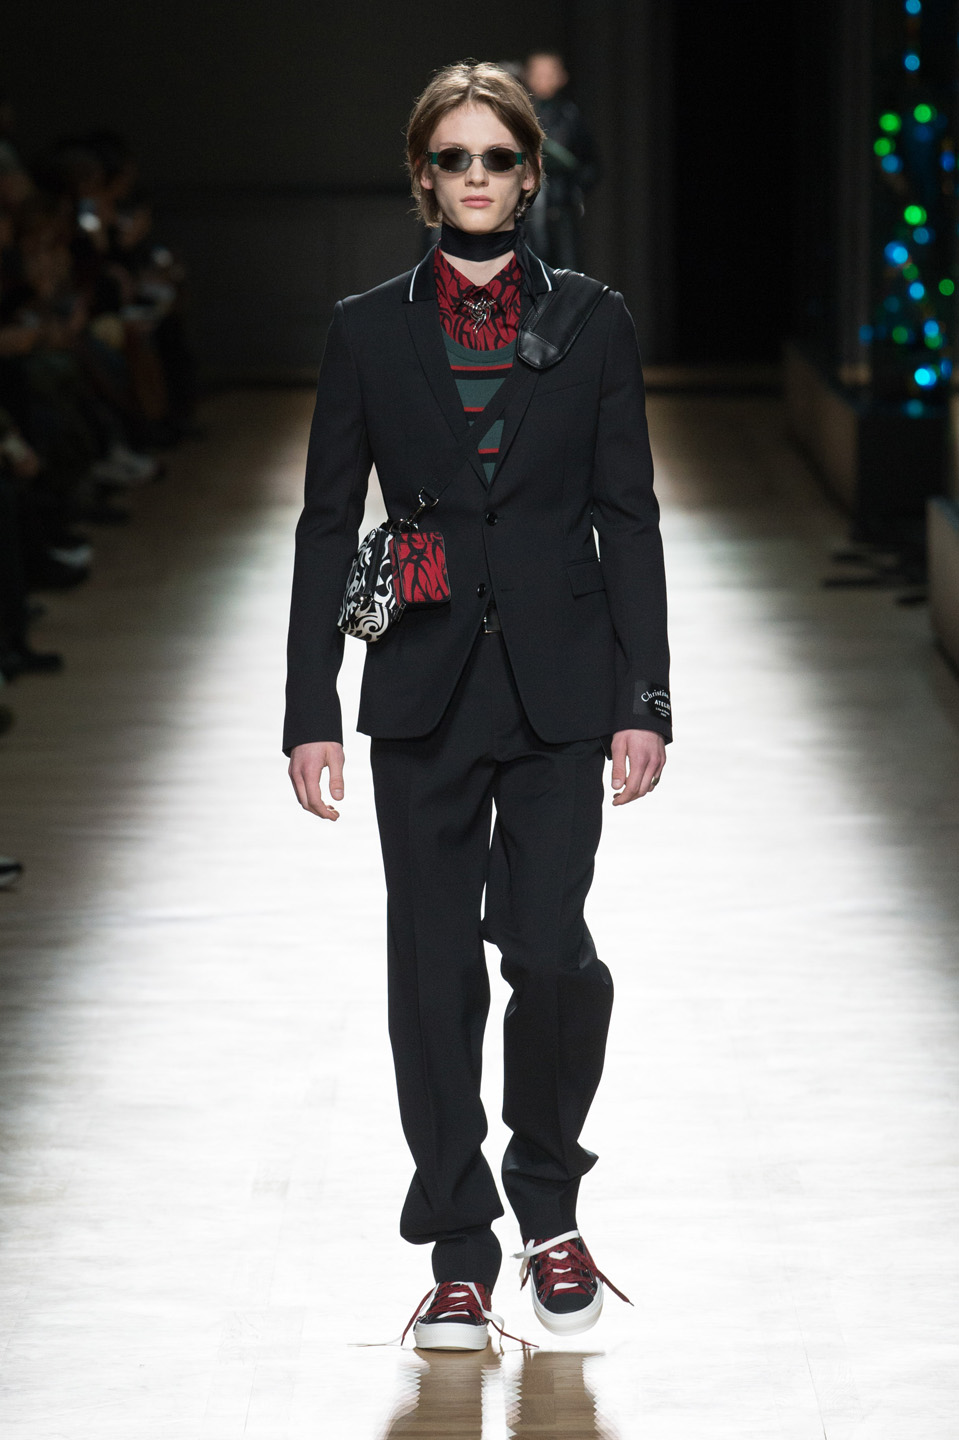 DIOR HOMME WINTER 18 19 BY PATRICE STABLE look15 Fall/WInter 2018 runway